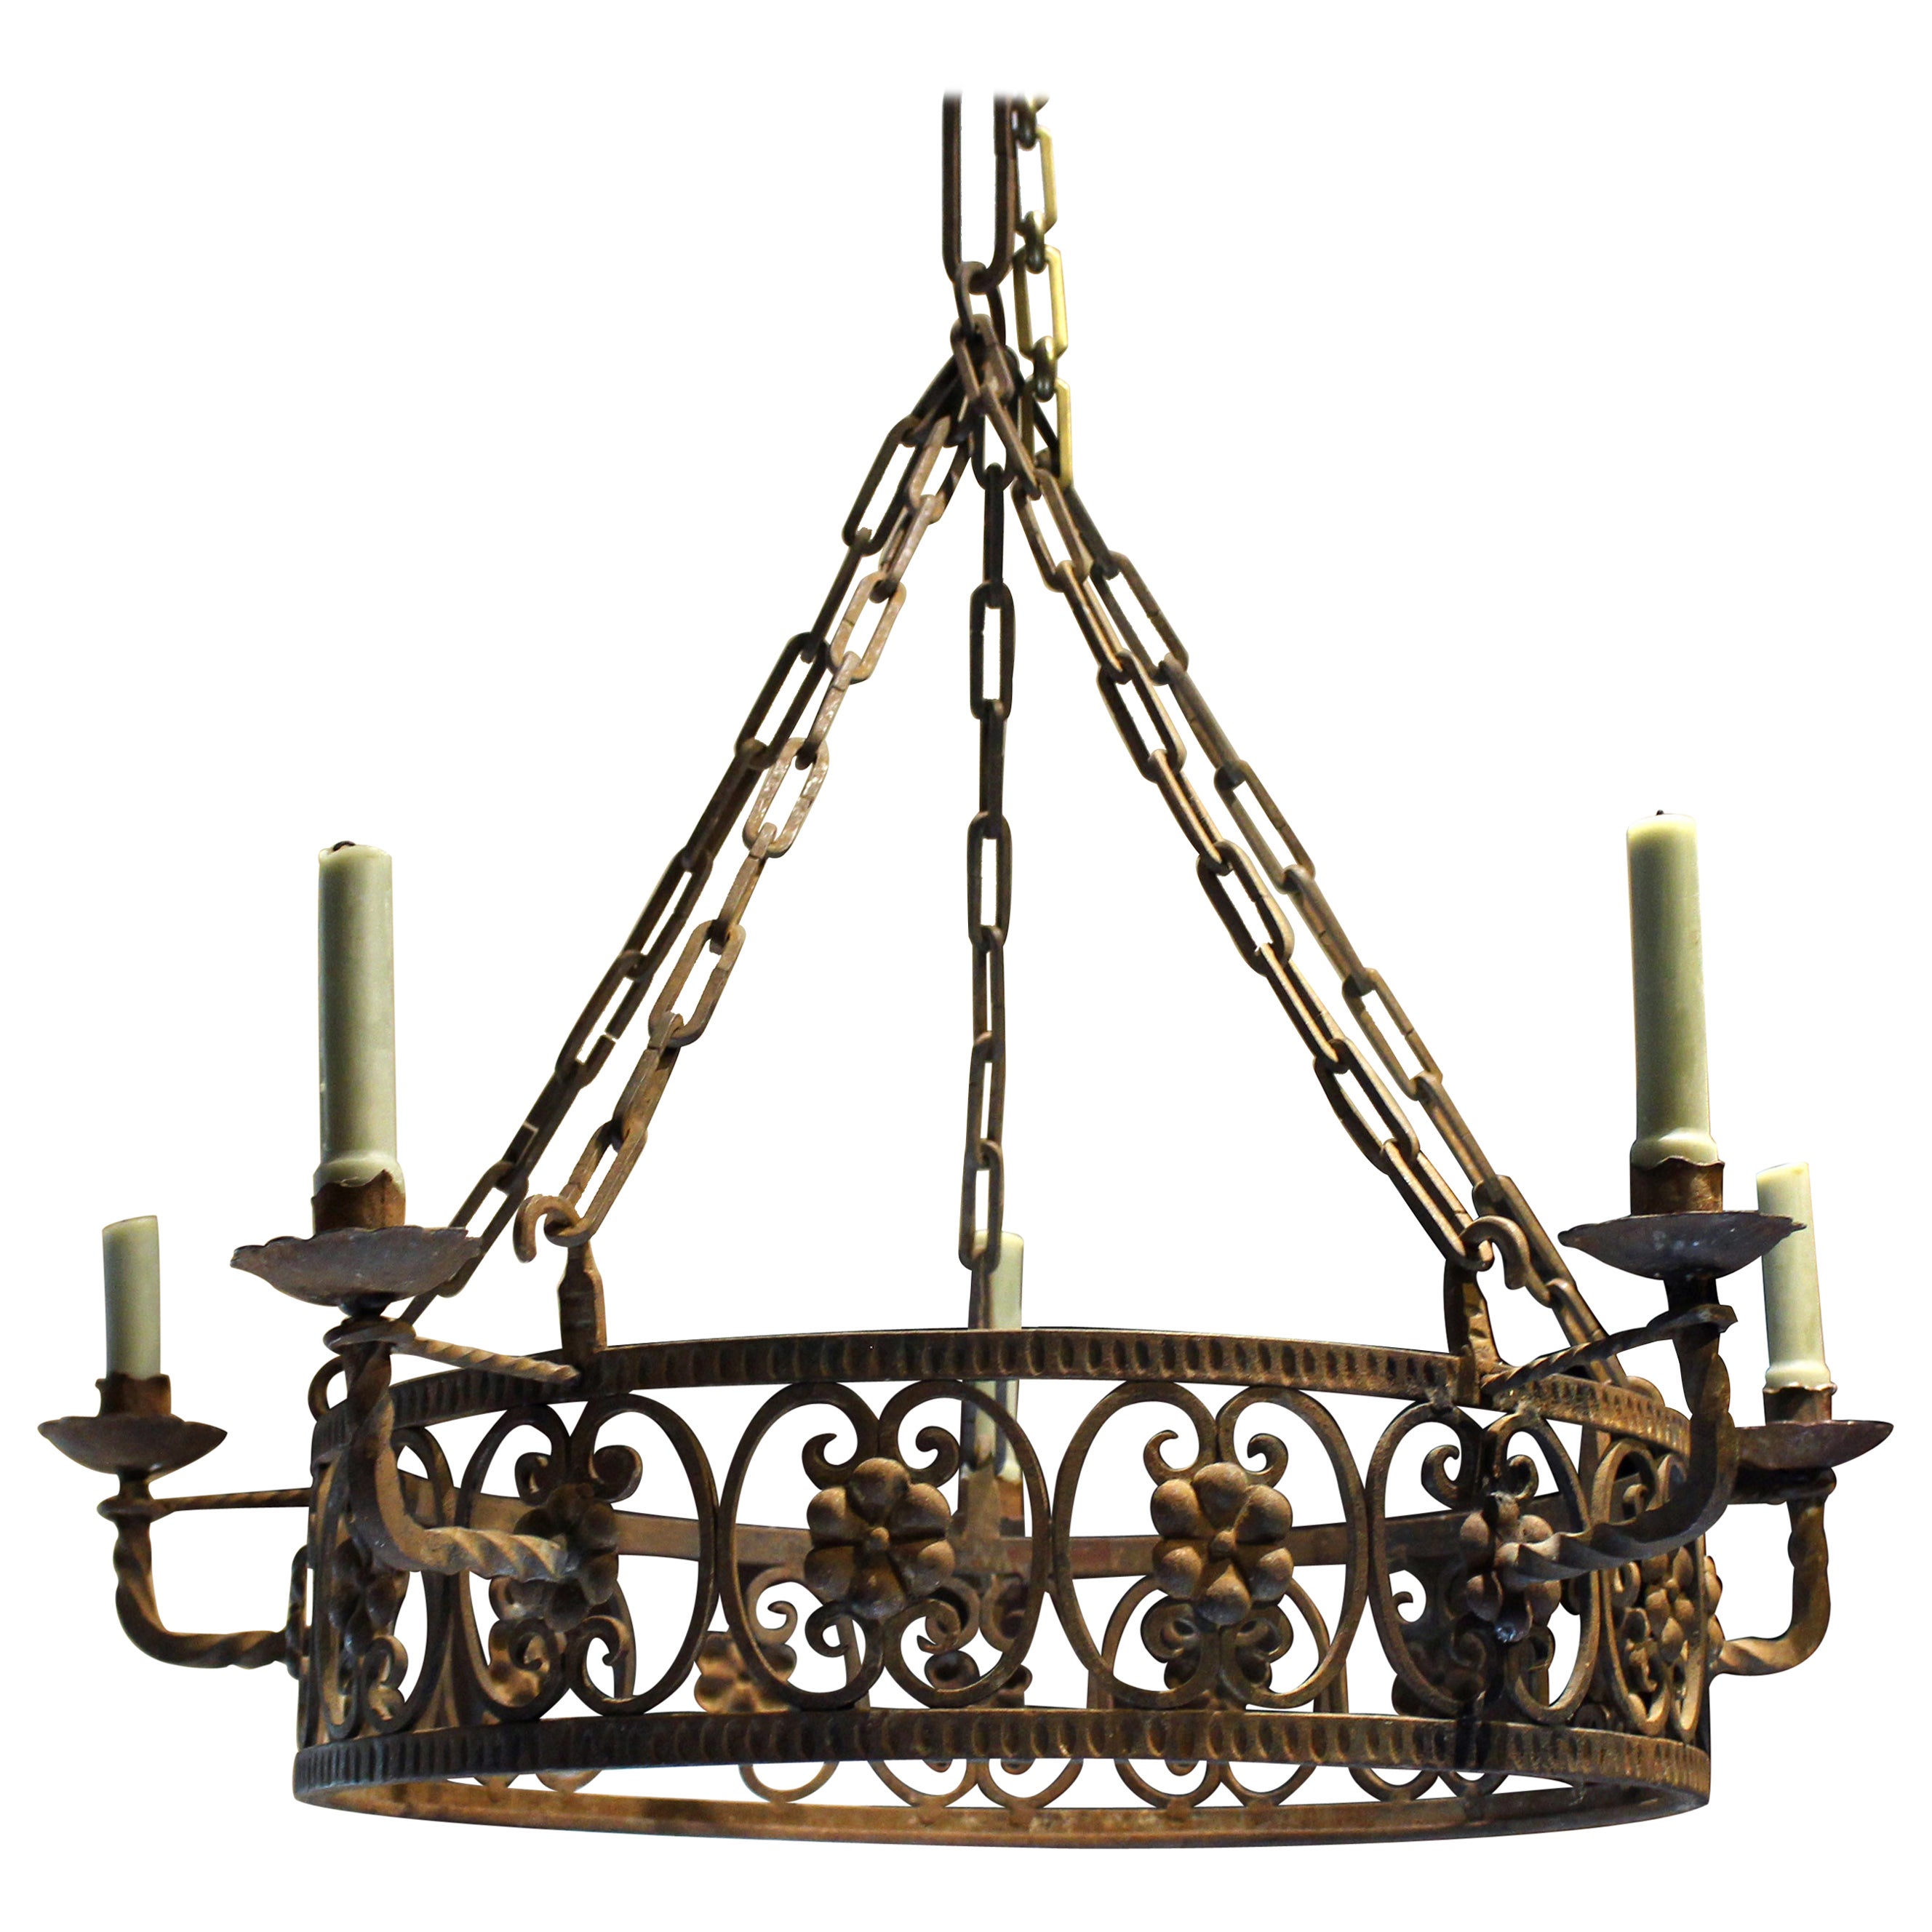 Early 20th Century Wrought Iron 5-candle Chandelier